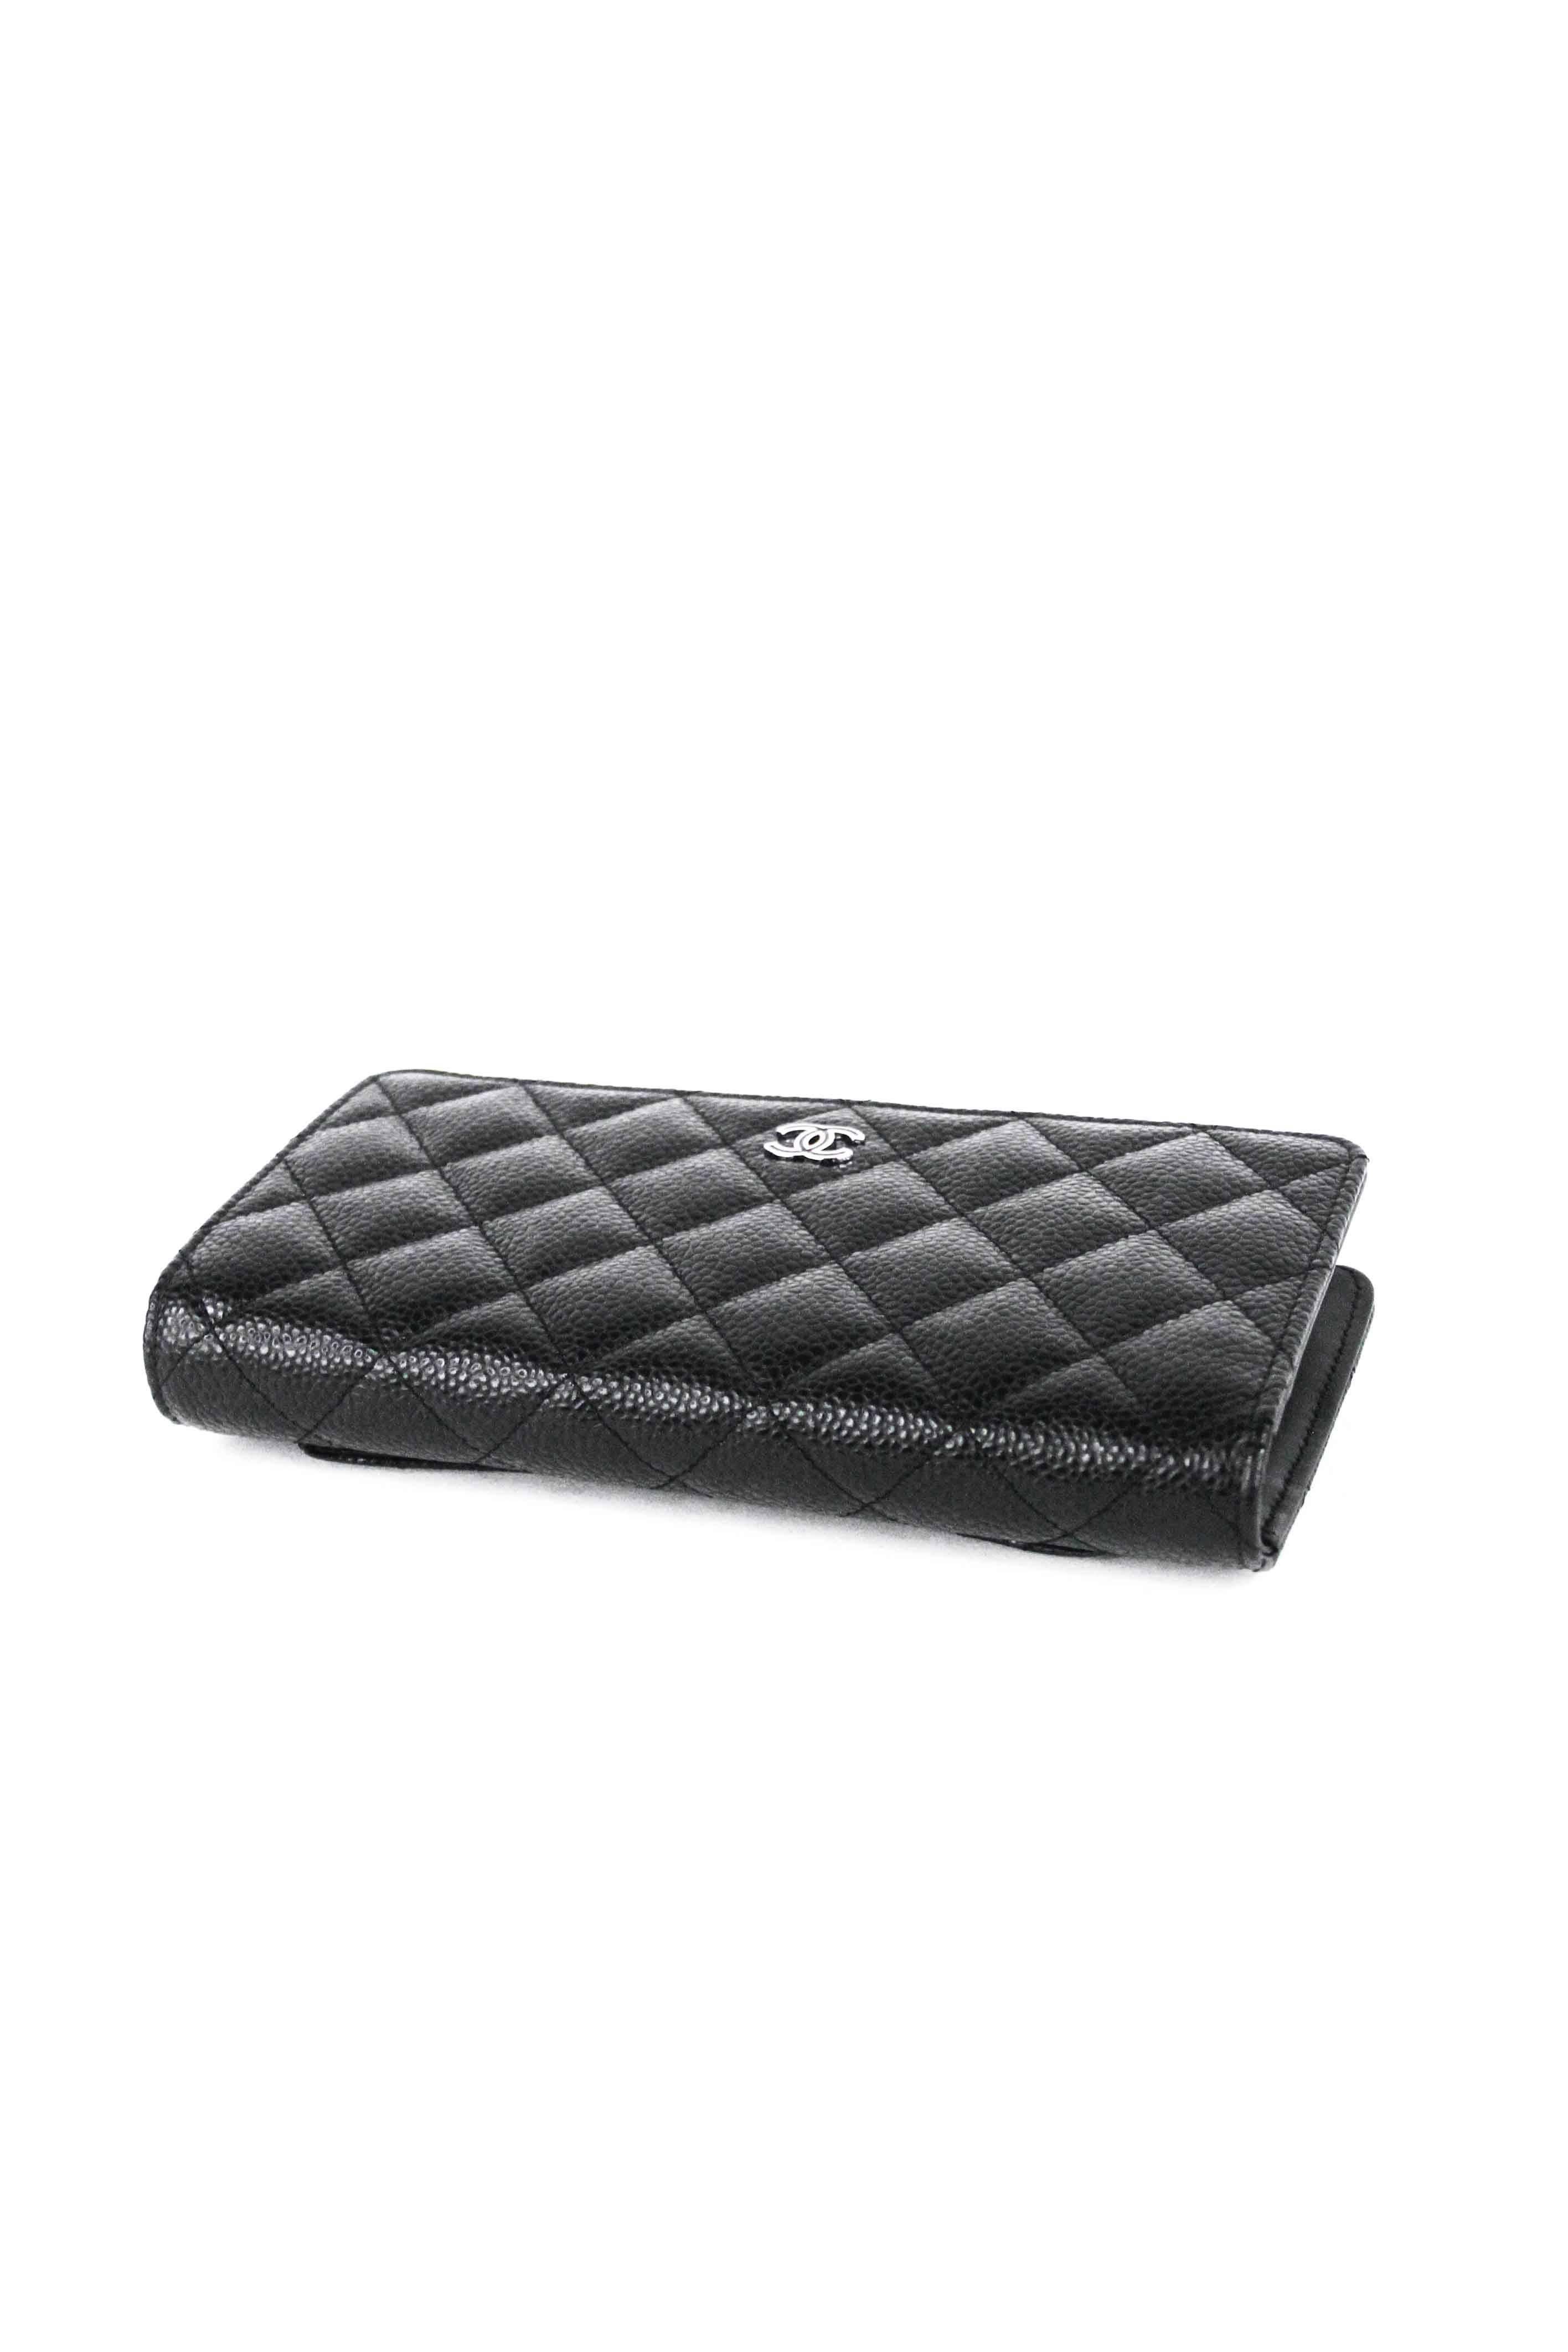 Chanel Quilted Caviar Long CC Wallet  4